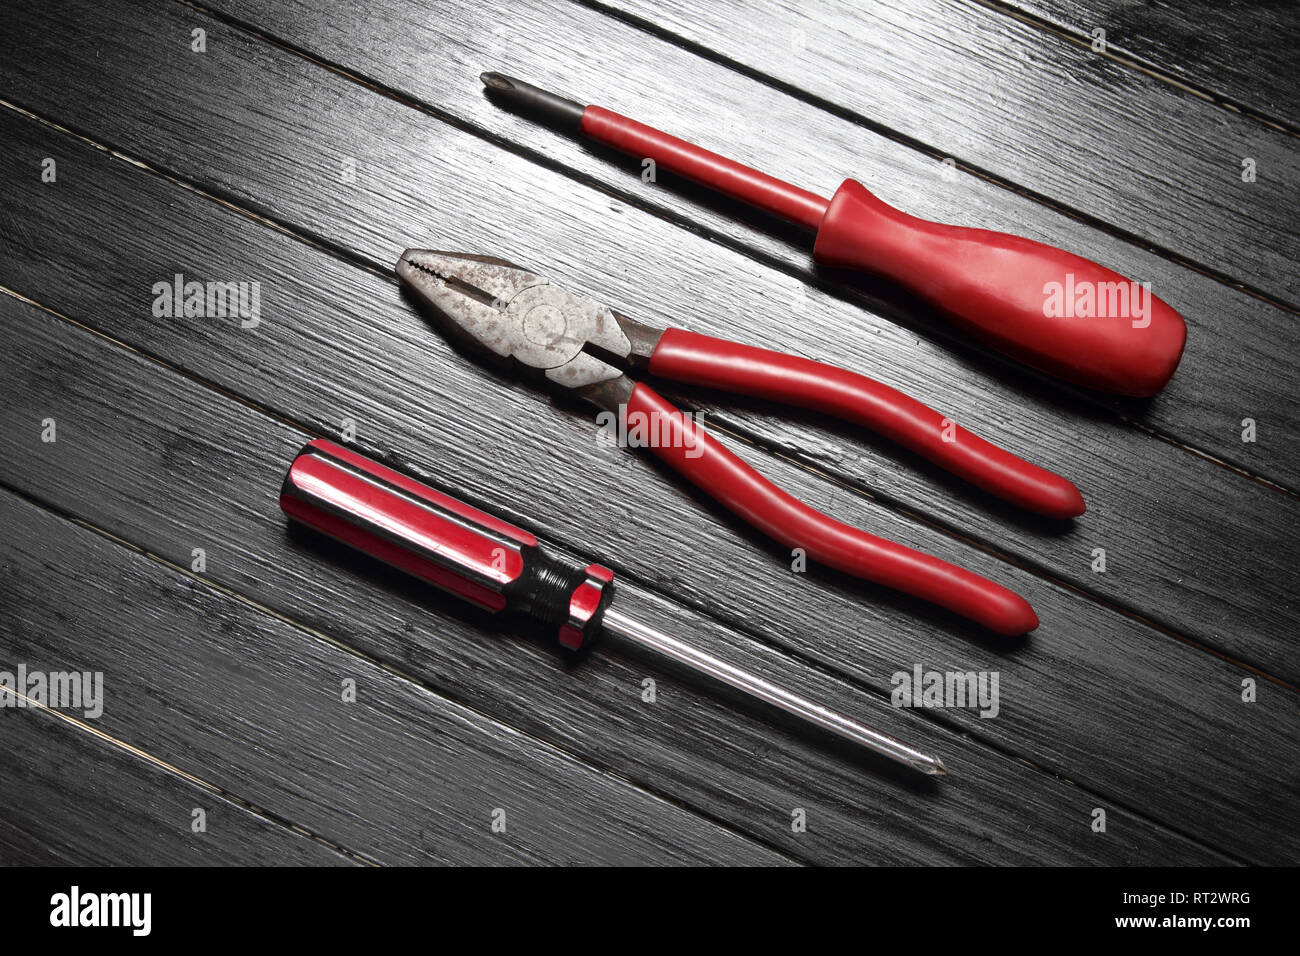 Hand Tools on Wooden Background Stock Photo